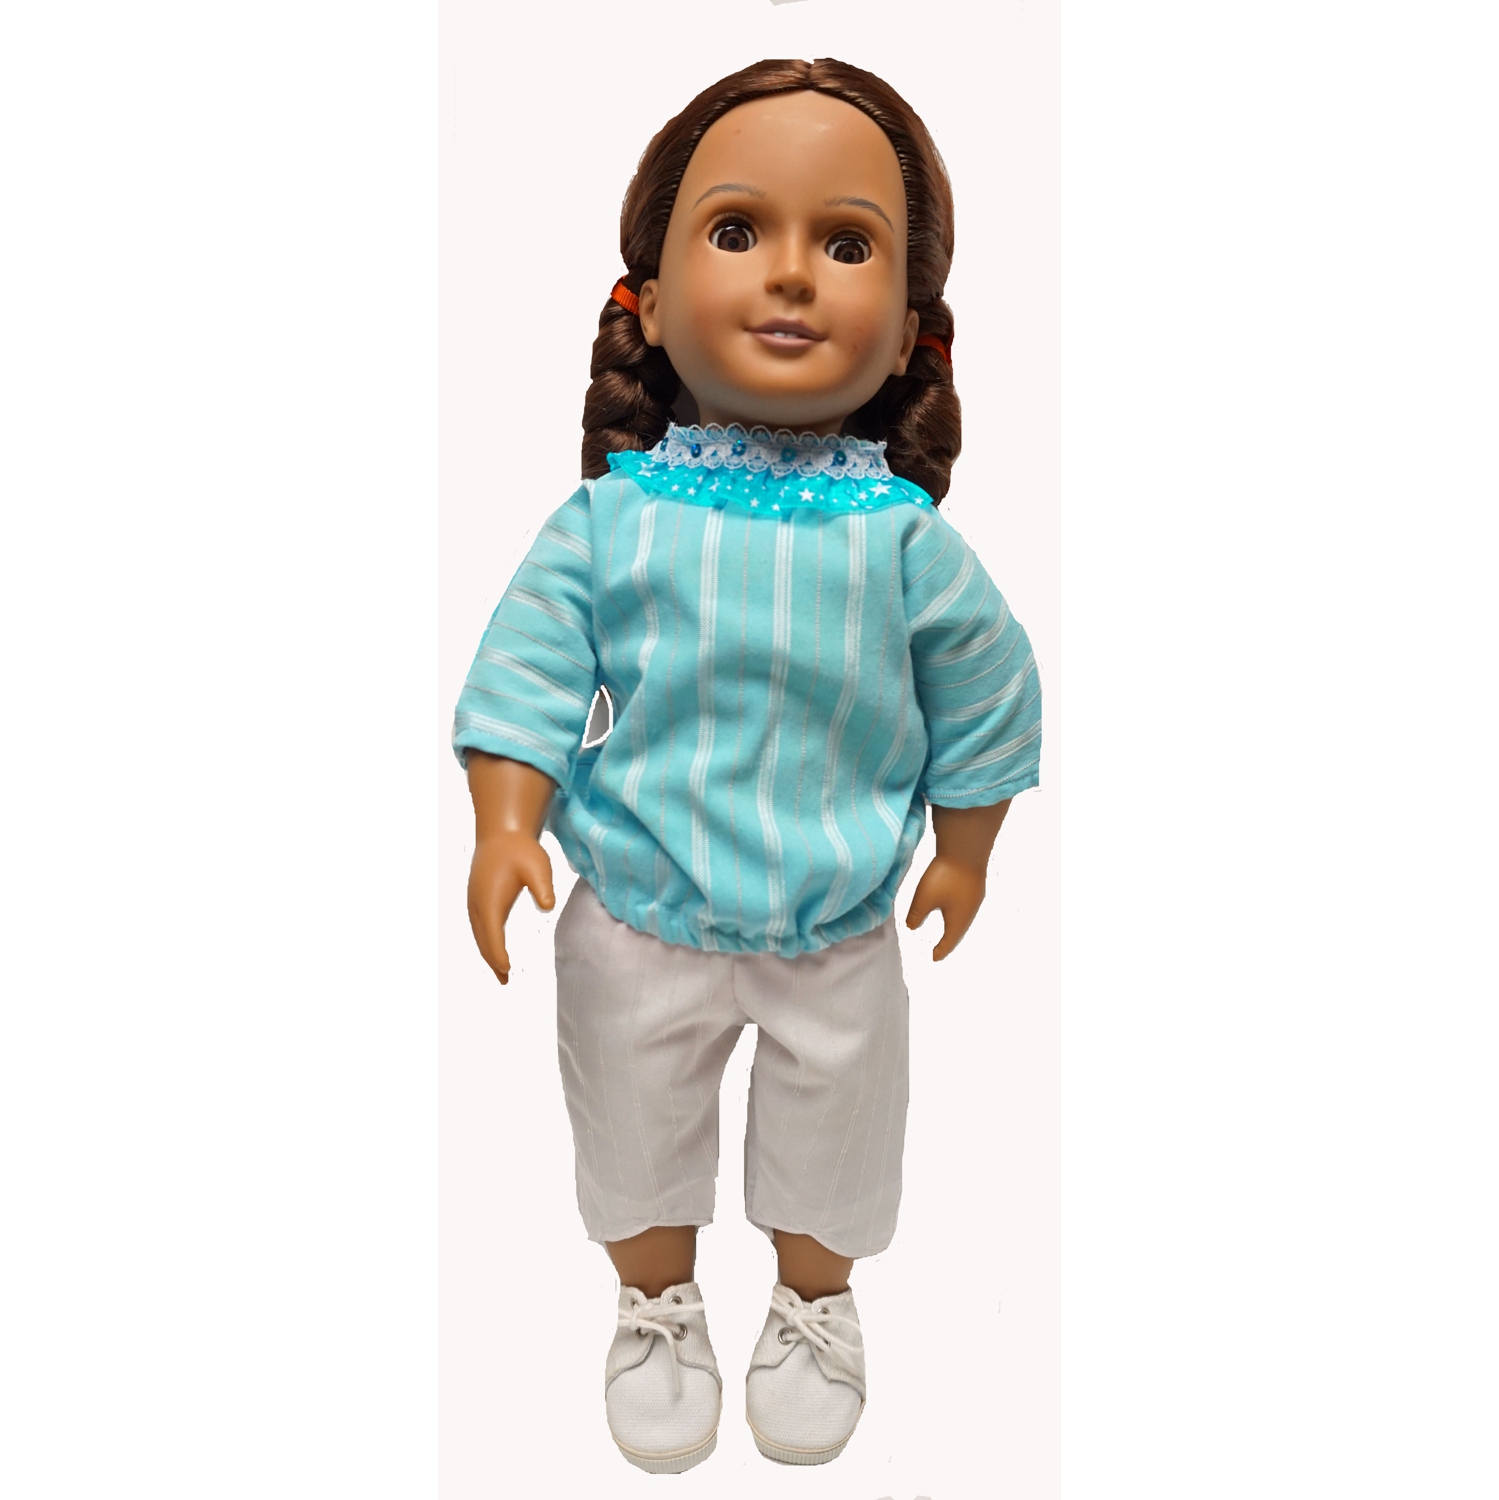 Doll Clothes Superstore Out And About Doll Clothes For 18 Inch Girl Dolls Like American Girl, Our Generation